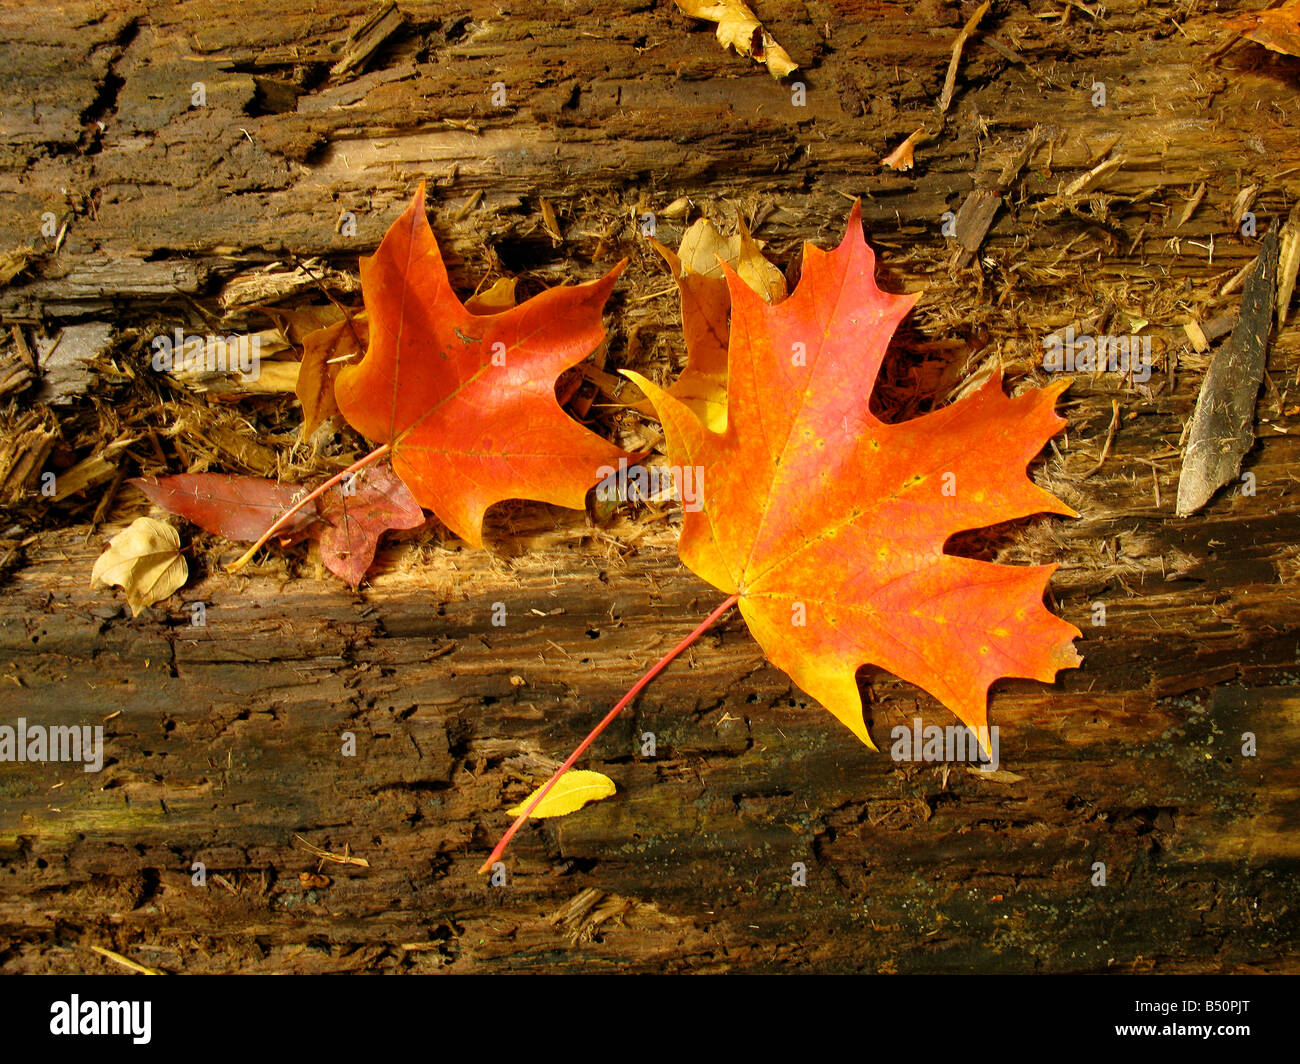 Fallen autumn leafs on decayed tree trunk on forest floor. Stock Photo